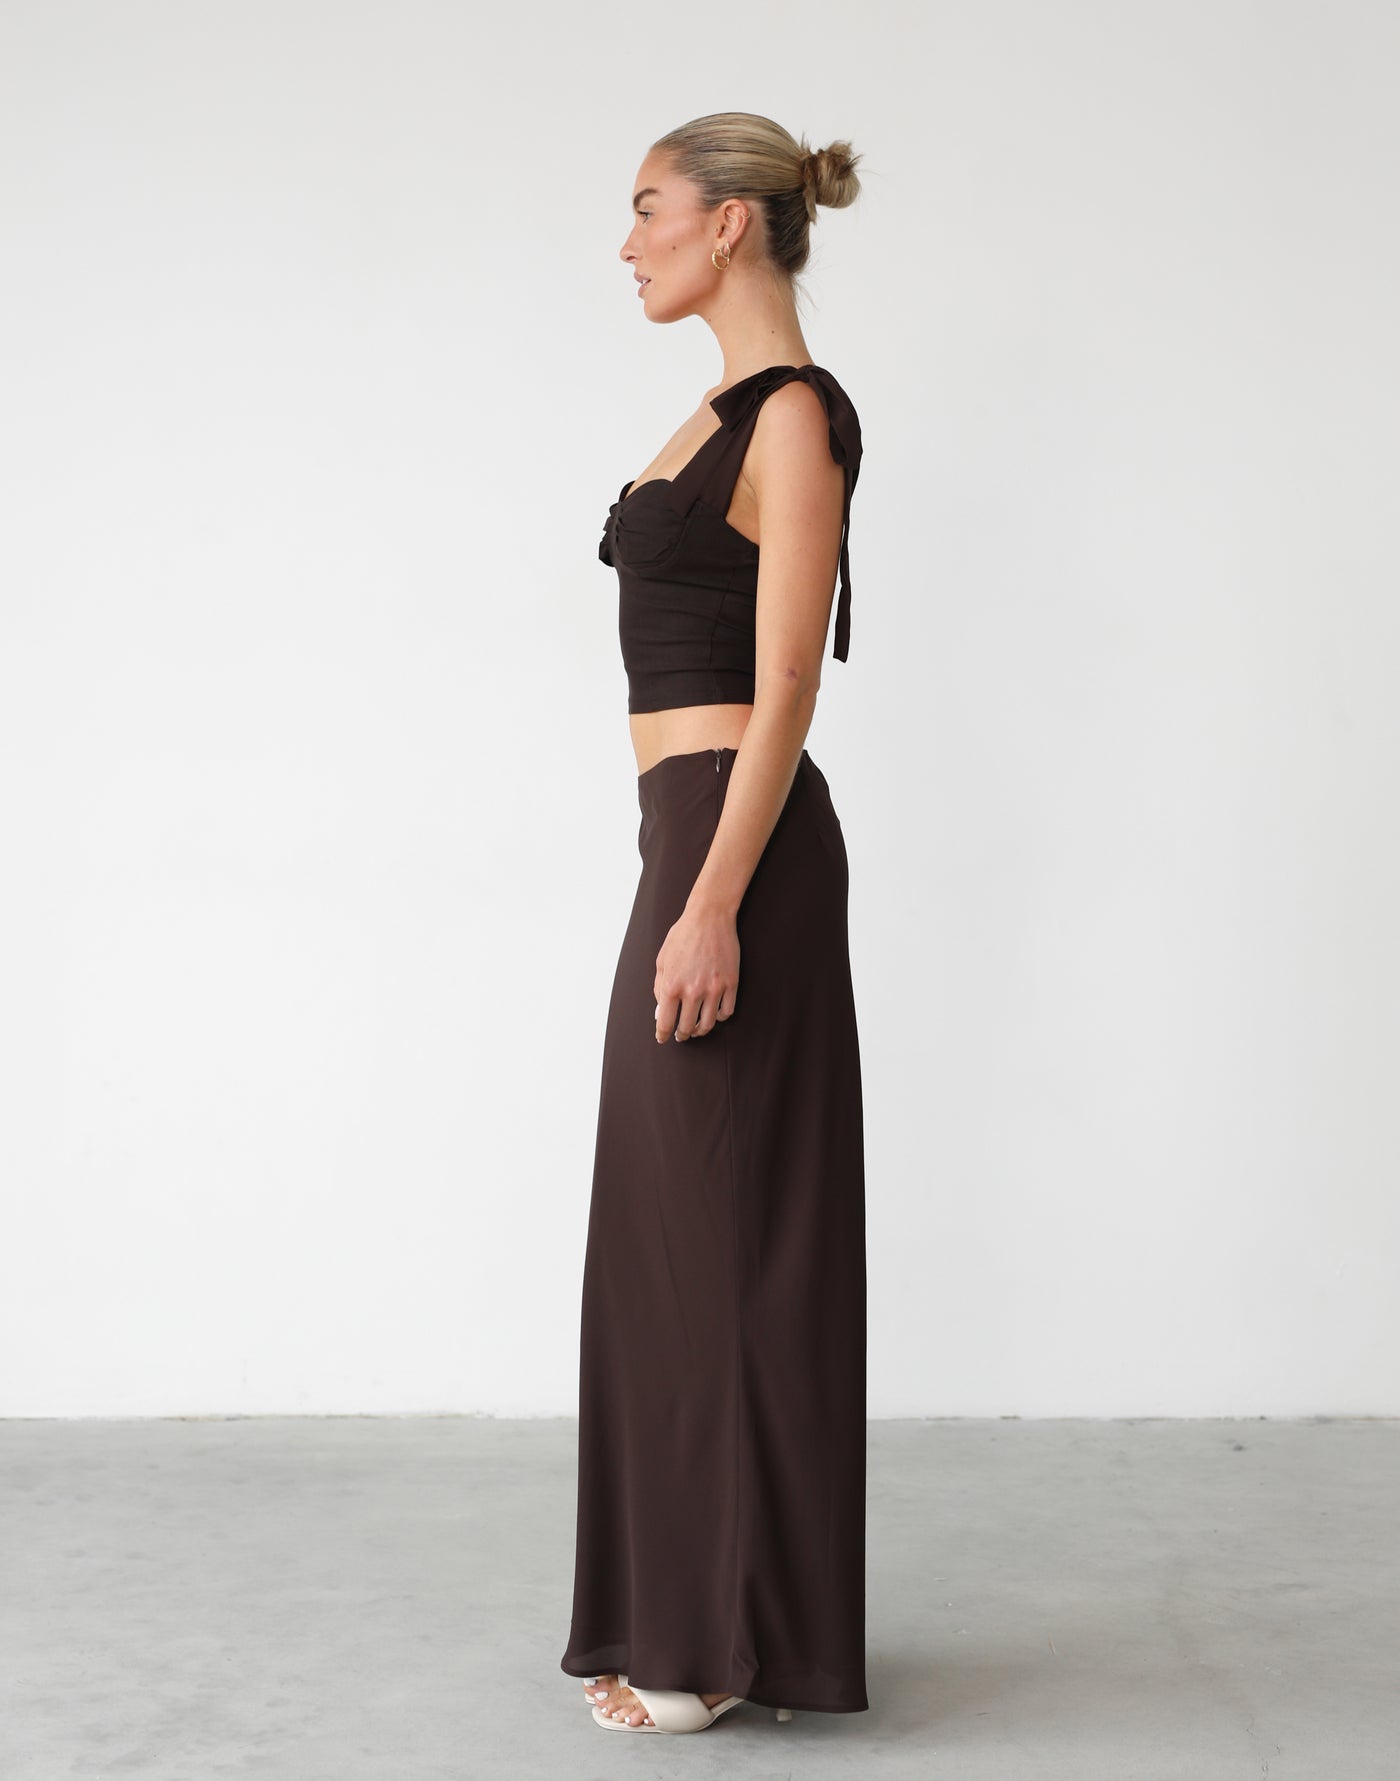 Isla Maxi Skirt (Chocolate) - Low/Mid Rise Lined Maxi Skirt - Women's Skirt - Charcoal Clothing